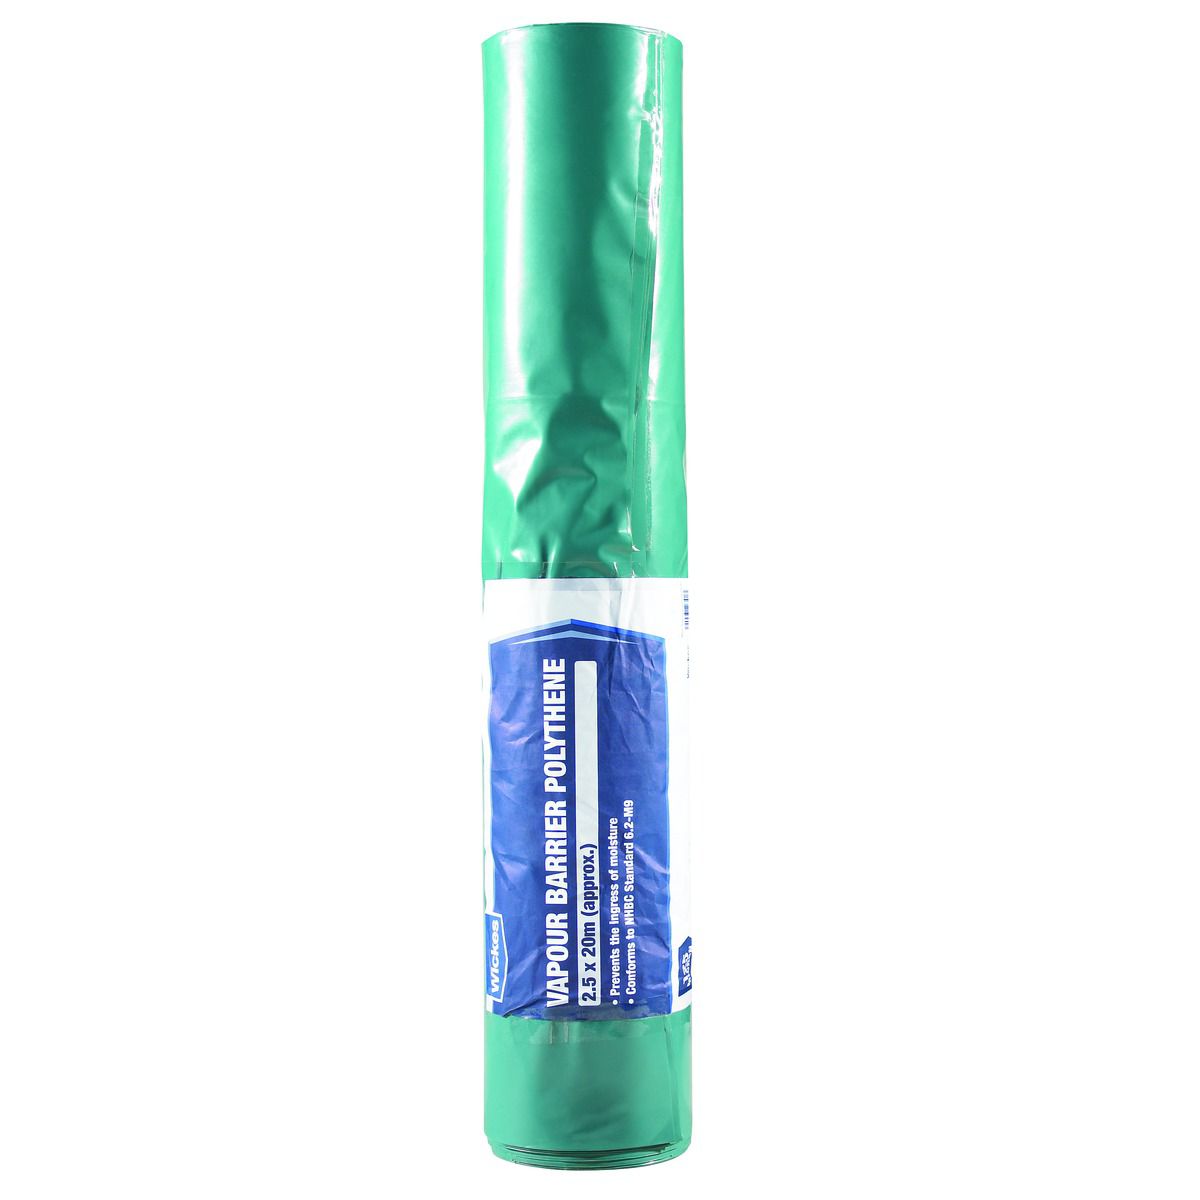 Image of Wickes Green Polythene Vapour Barrier - 2.5 x 20m